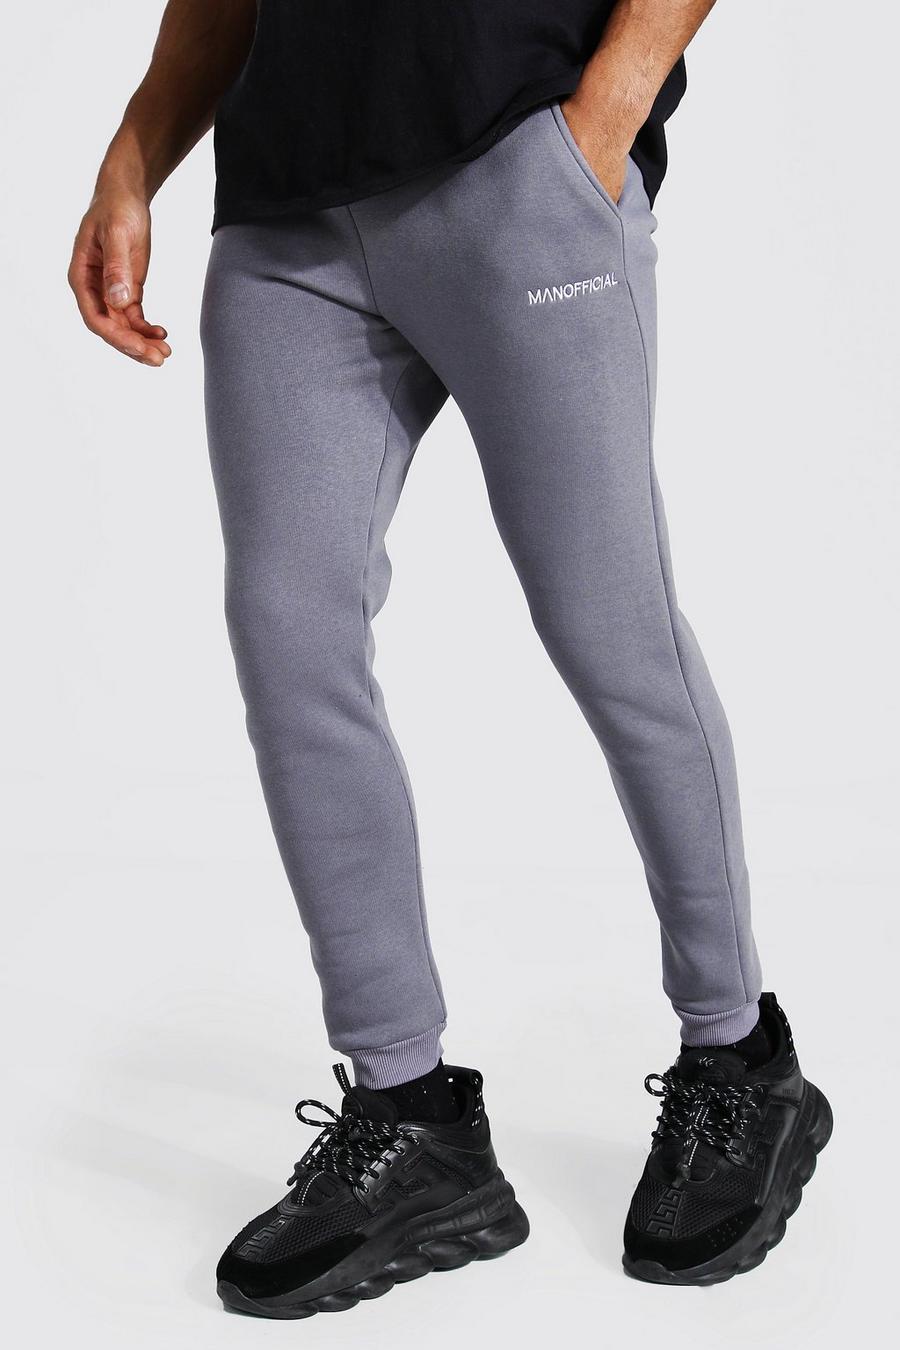 Charcoal Skinny Man Official Double Waistband Track Pants image number 1